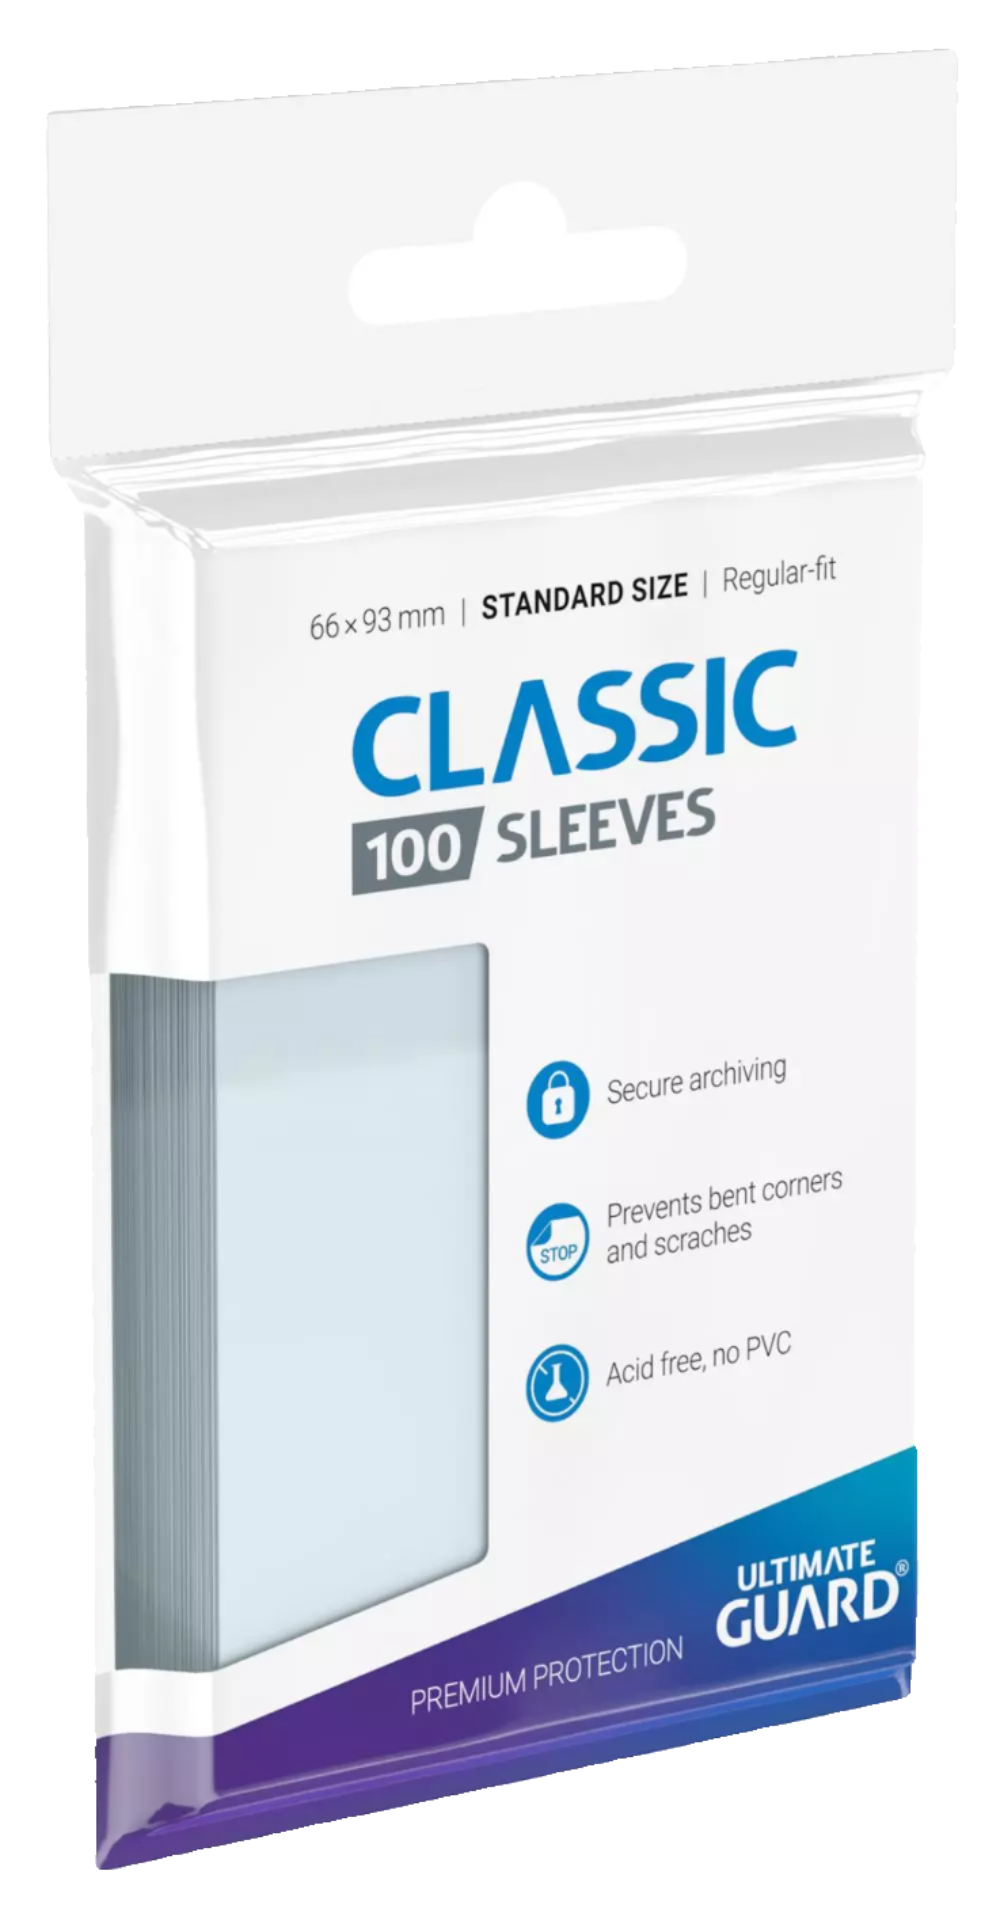 Ultimate Guard - Classic Sleeves - Standard Size - 100pk